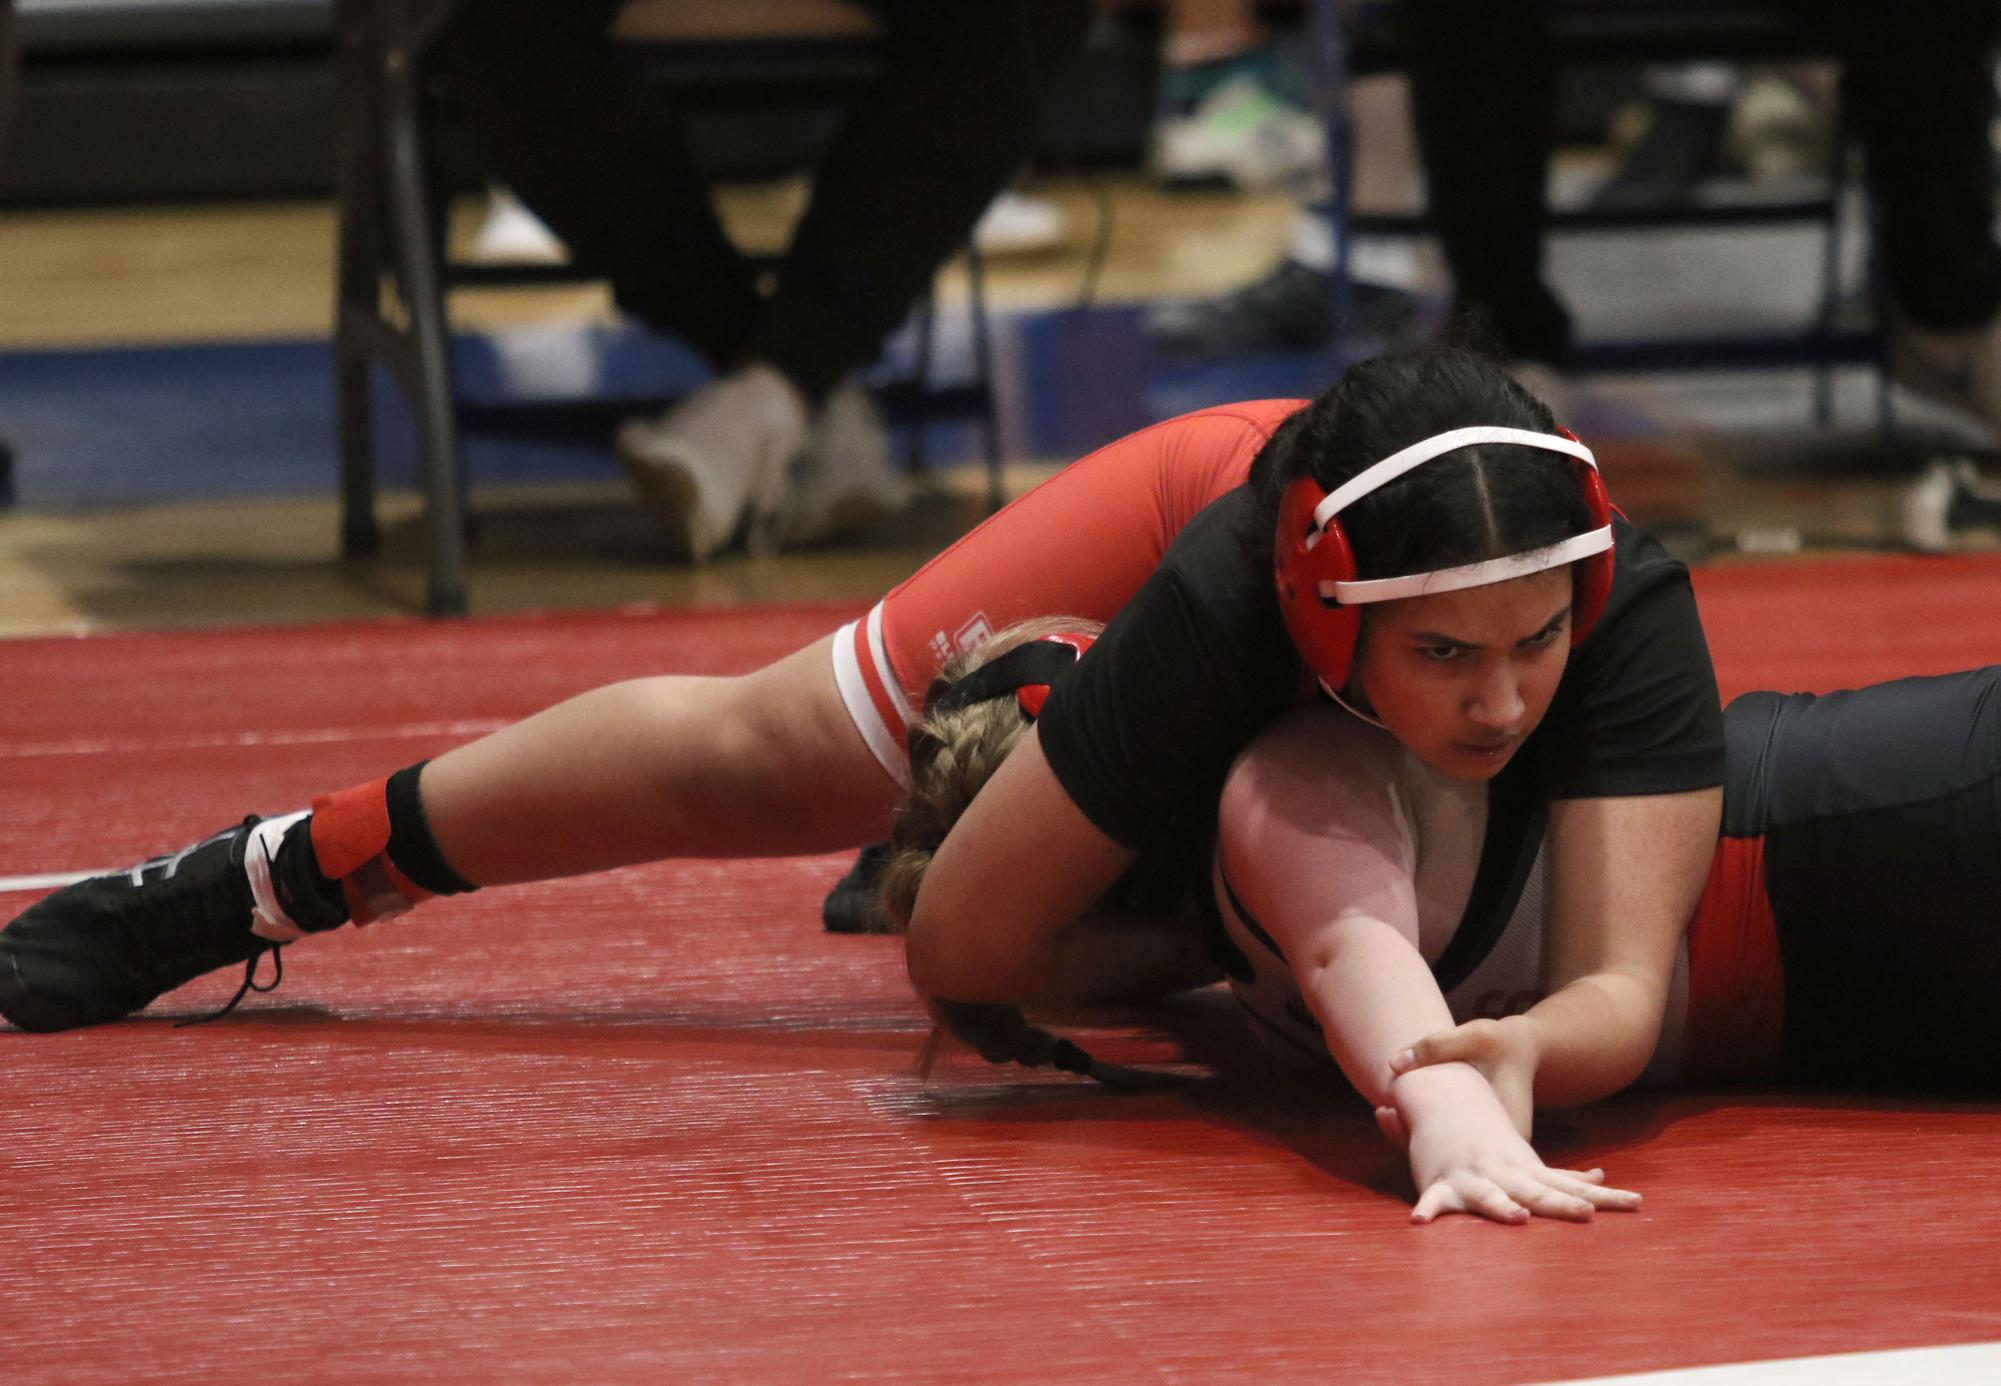 Girls Wrestling on the Rise: Team Doubling in Size, Impressive Performances, and Growing Popularity